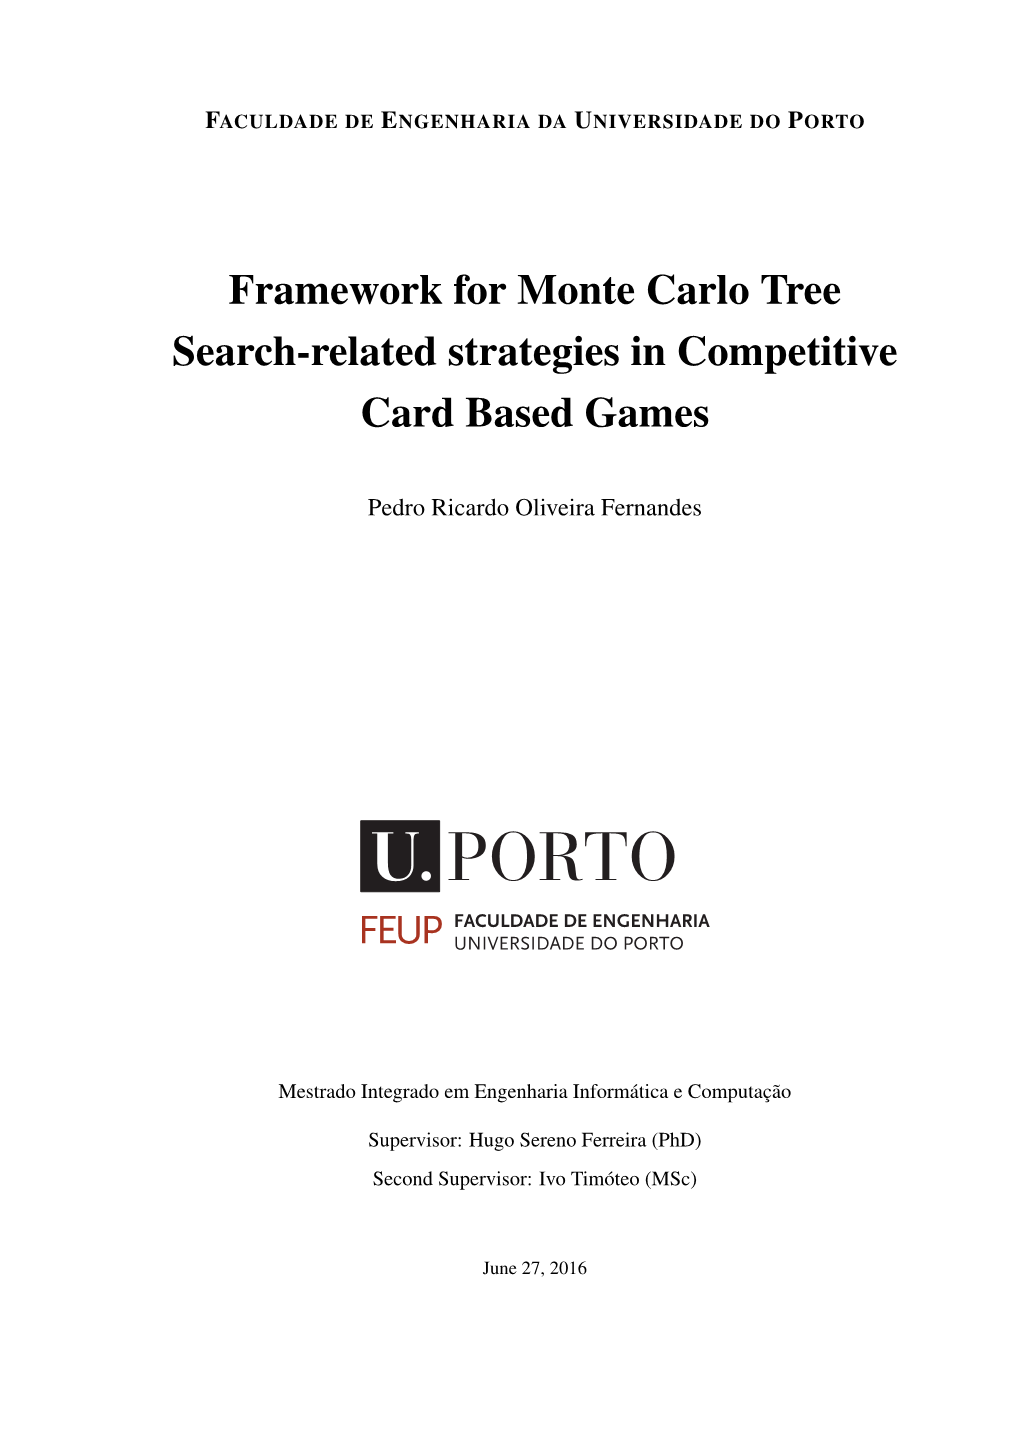 Framework for Monte Carlo Tree Search-Related Strategies in Competitive Card Based Games